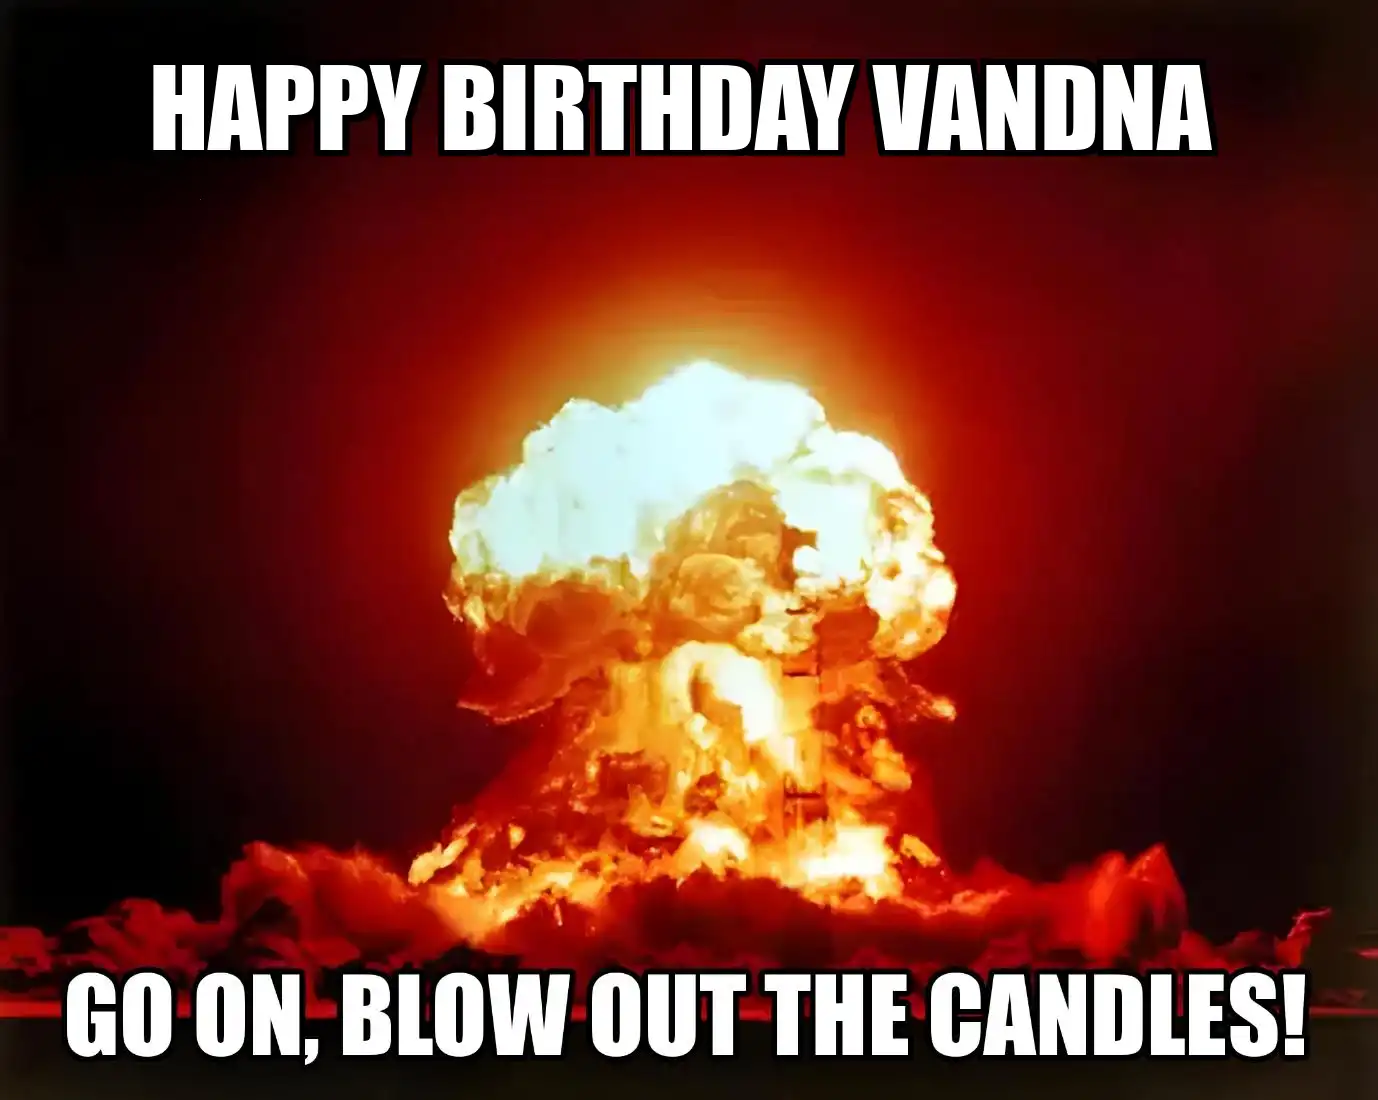 Happy Birthday Vandna Go On Blow Out The Candles Meme